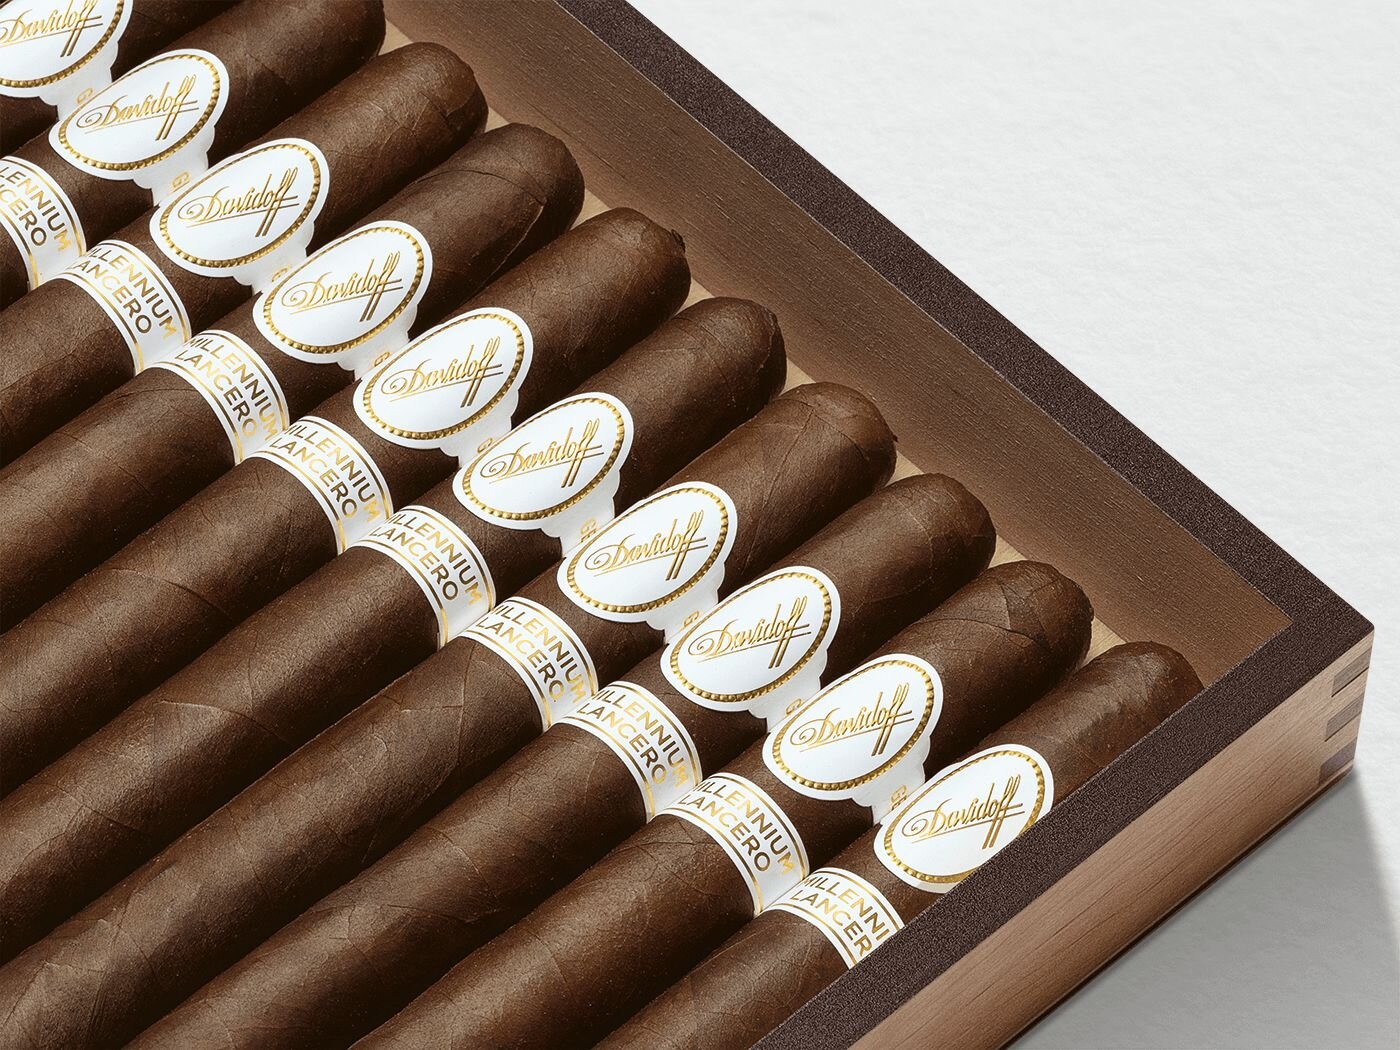 Opened box of the Davidoff Millennium Lancero Limited Edition Collection with 10 cigars inside.